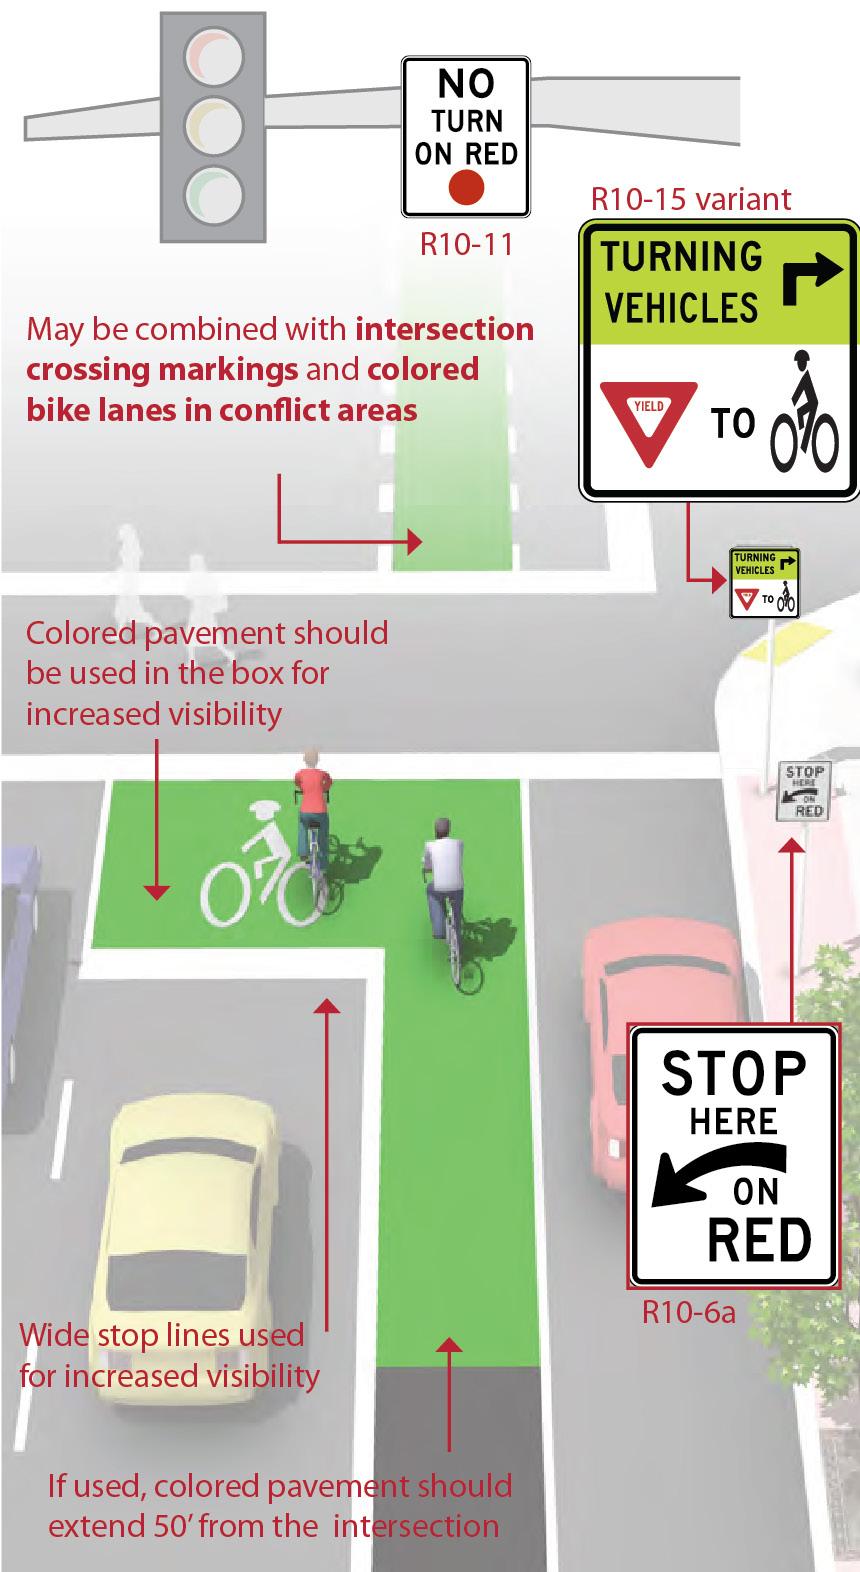 9.12 Bikeways at Intersections 9.12.1 Bike Box Figure 9-54. Bike Box 9.12.1.1 Description - A bike box is a designated area located at the head of a traffic lane at a signalized intersection that